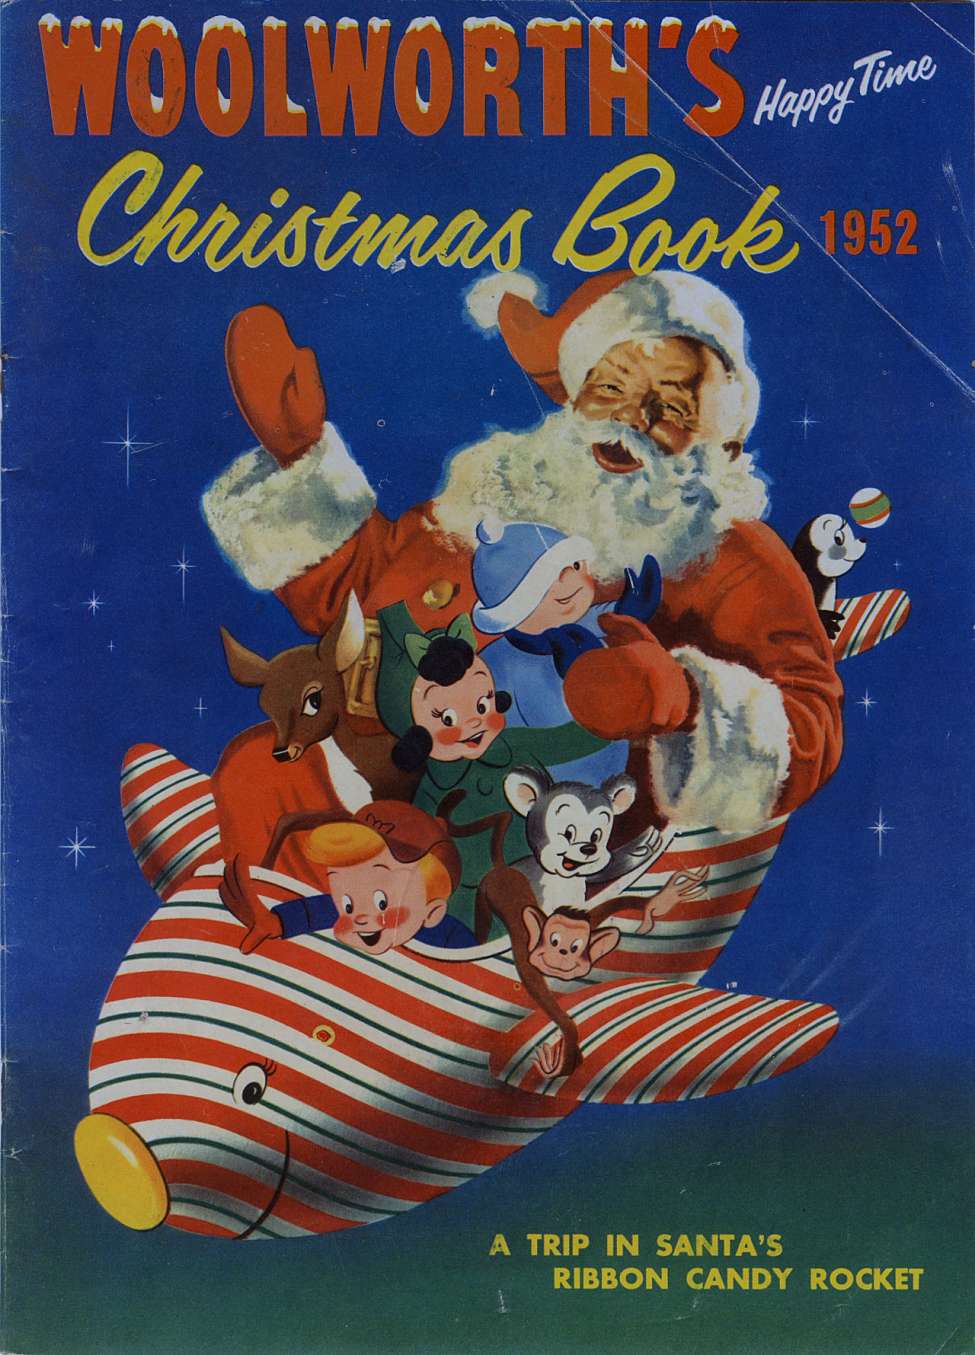 Book Cover For Woolworth's Happy Time Christmas Book 1952 - Version 1